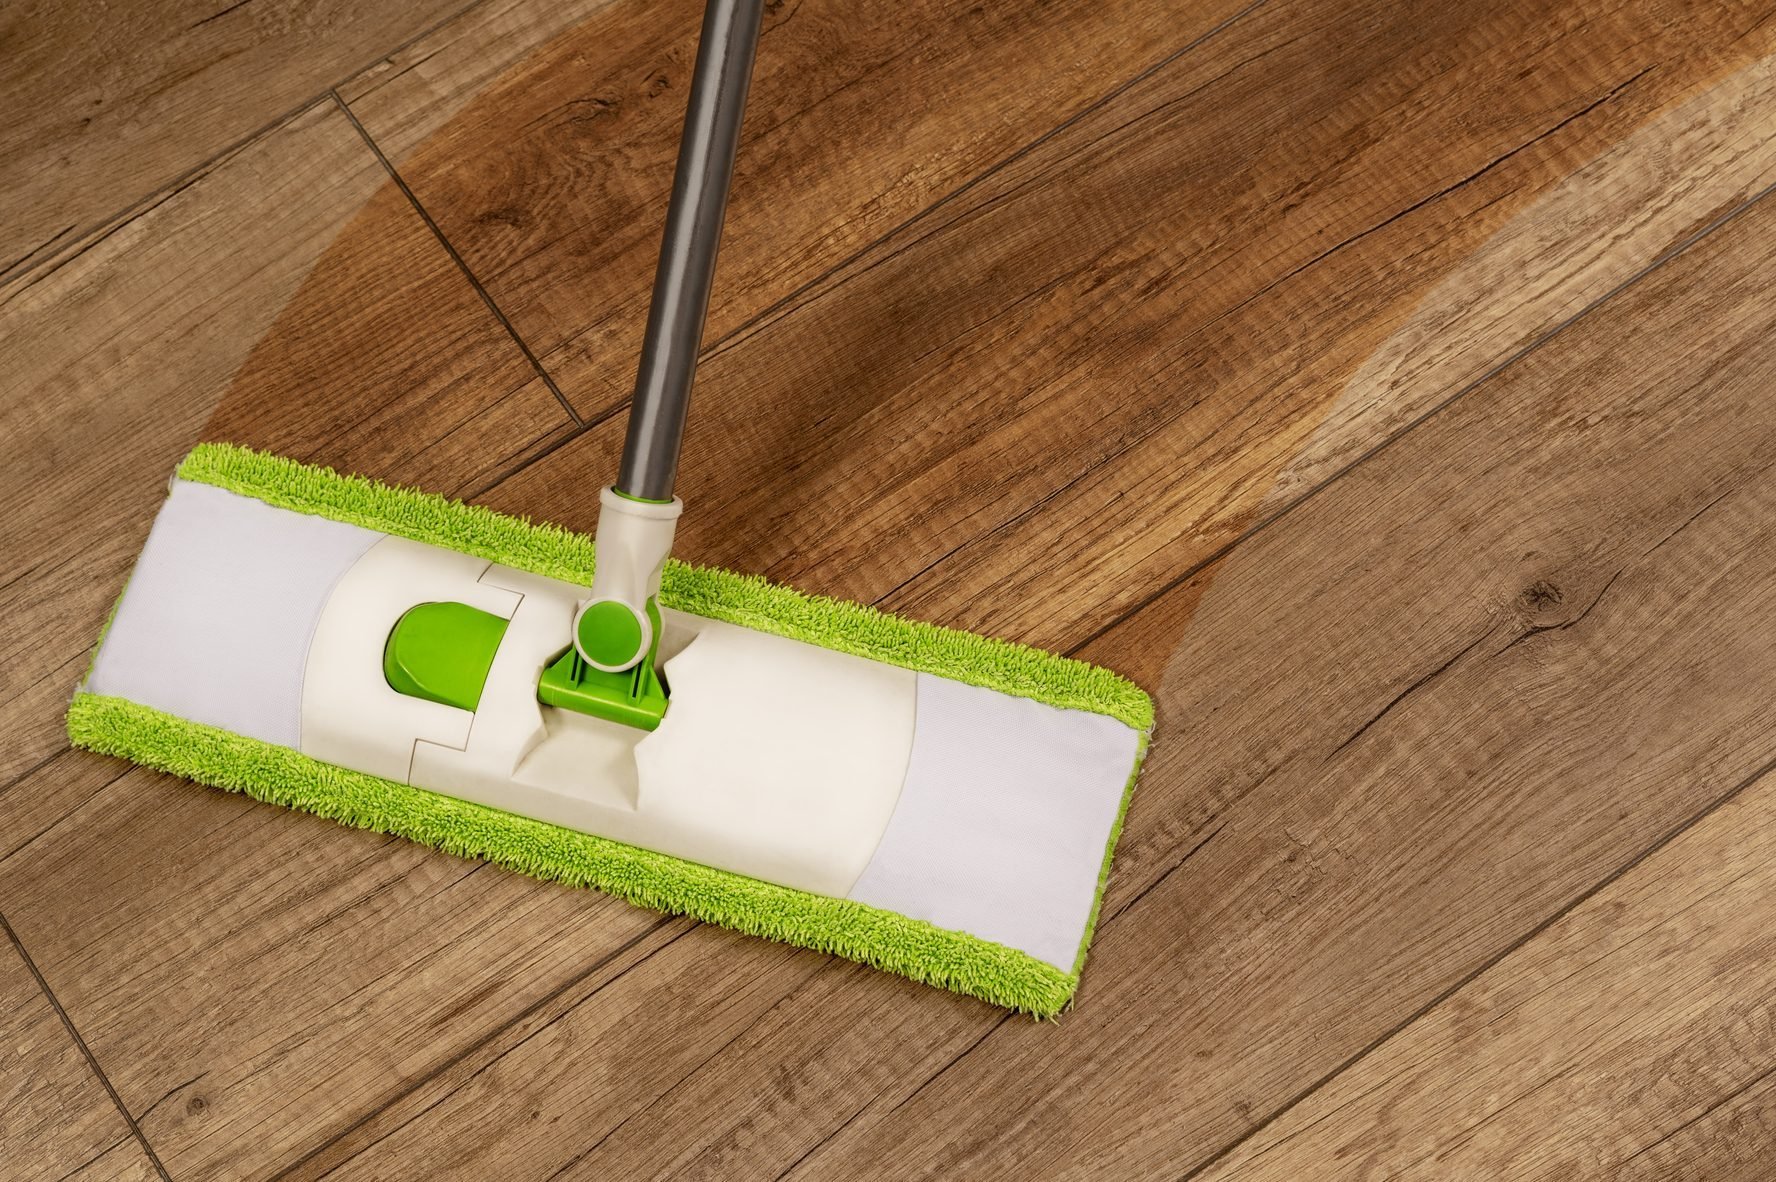 The Best Way to Clean Floors of All Kinds: Wood, Vinyl, Stone and More